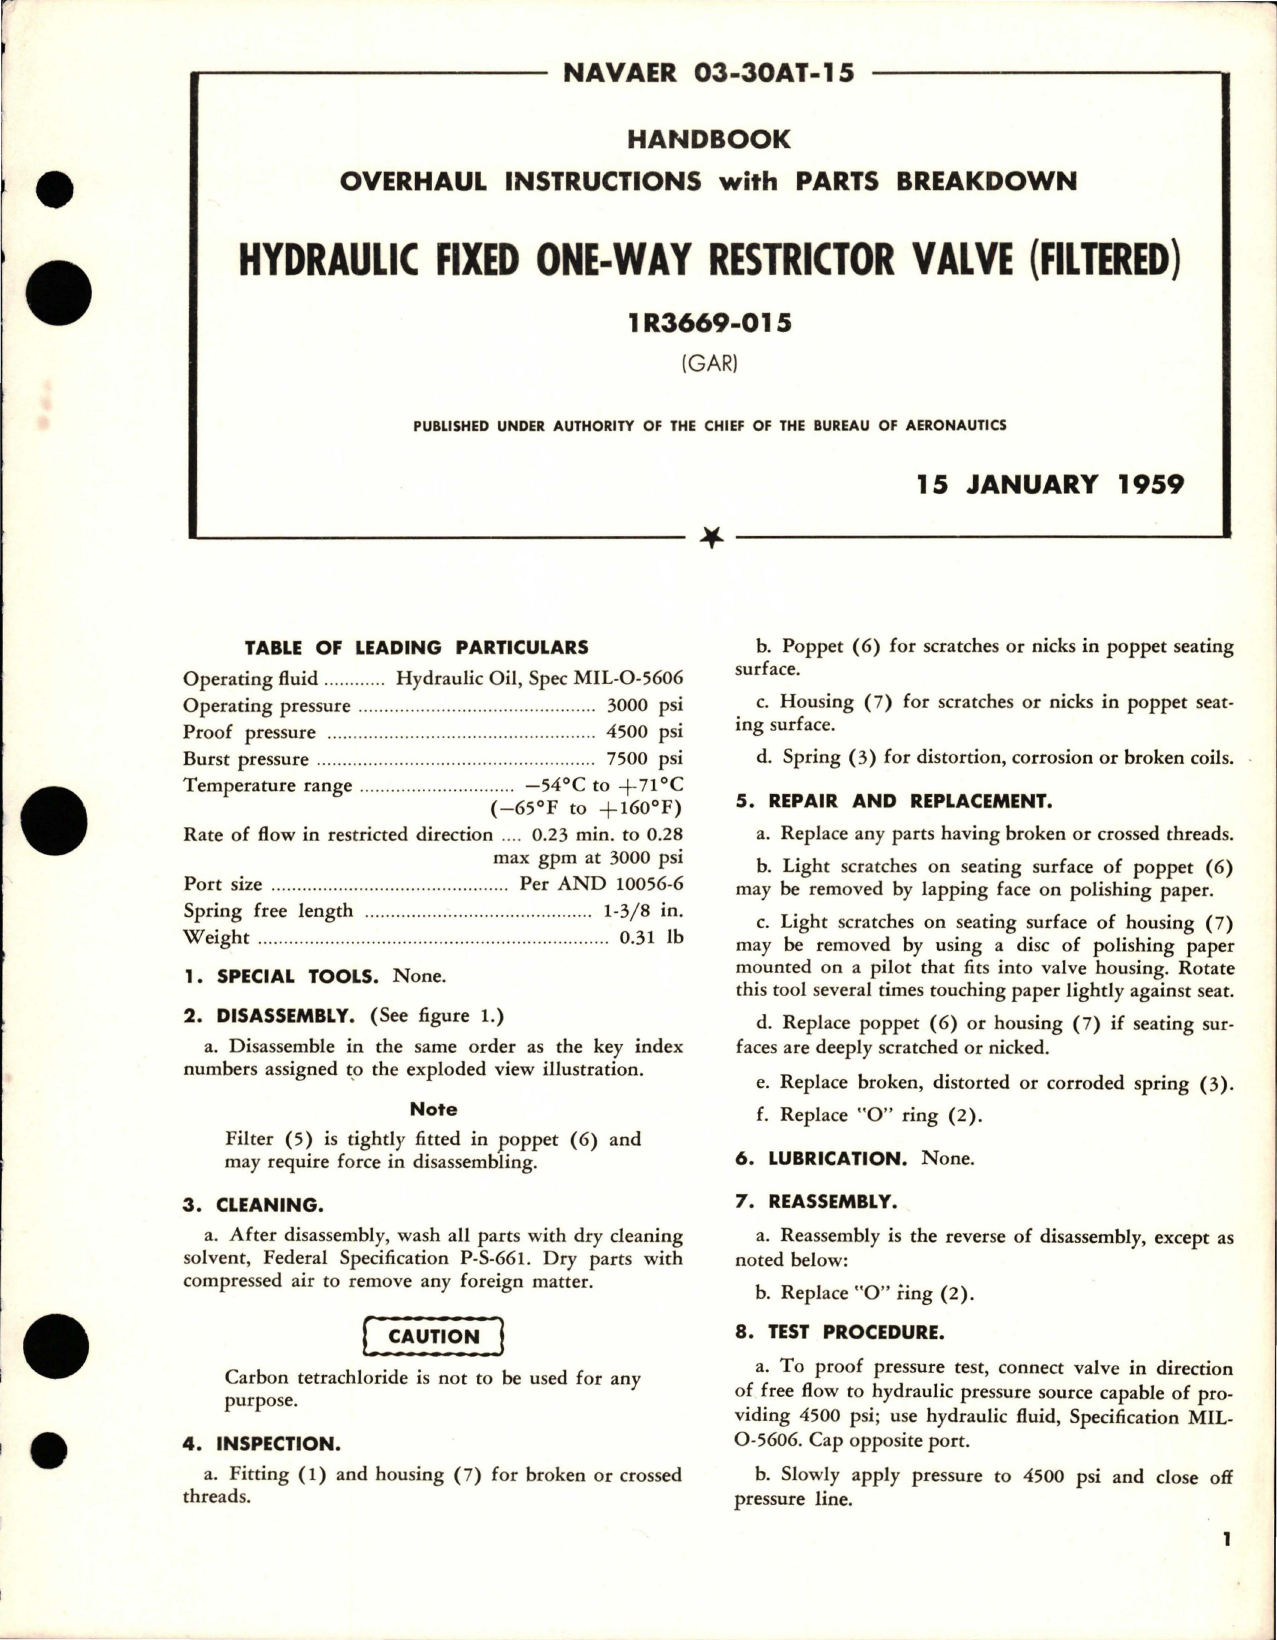 Sample page 1 from AirCorps Library document: Overhaul Instructions with Parts Breakdown for Hydraulic Fixed One-Way Restrictor Valve (Filtered) 1R3669-015 